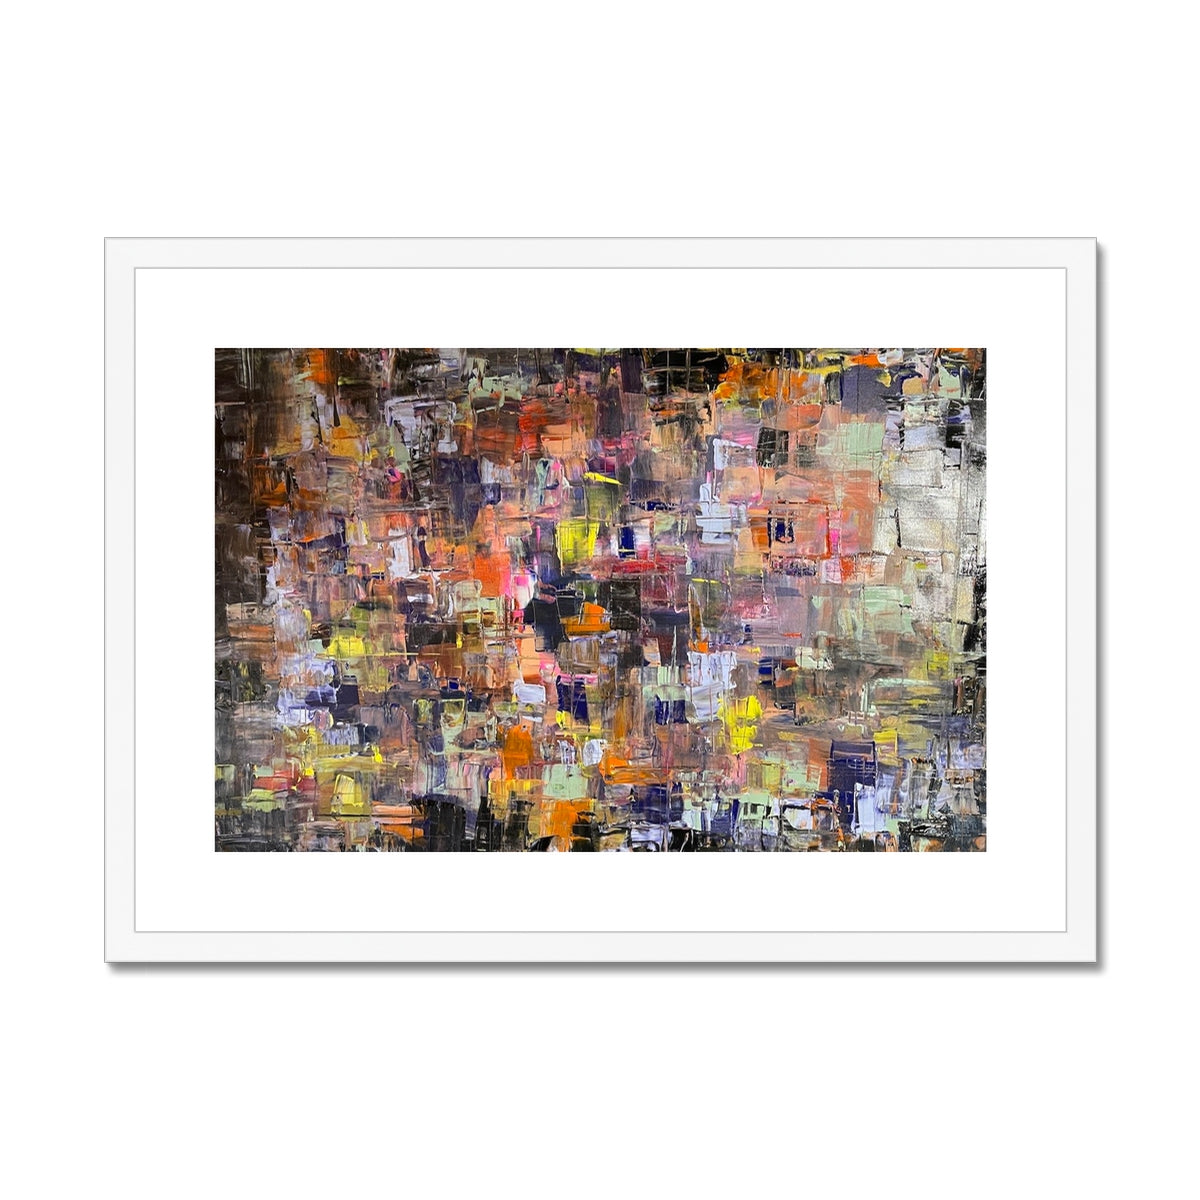 Never Enough Abstract Painting | Framed & Mounted Prints From Scotland-Framed & Mounted Prints-Abstract & Impressionistic Art Gallery-A2 Landscape-White Frame-Paintings, Prints, Homeware, Art Gifts From Scotland By Scottish Artist Kevin Hunter